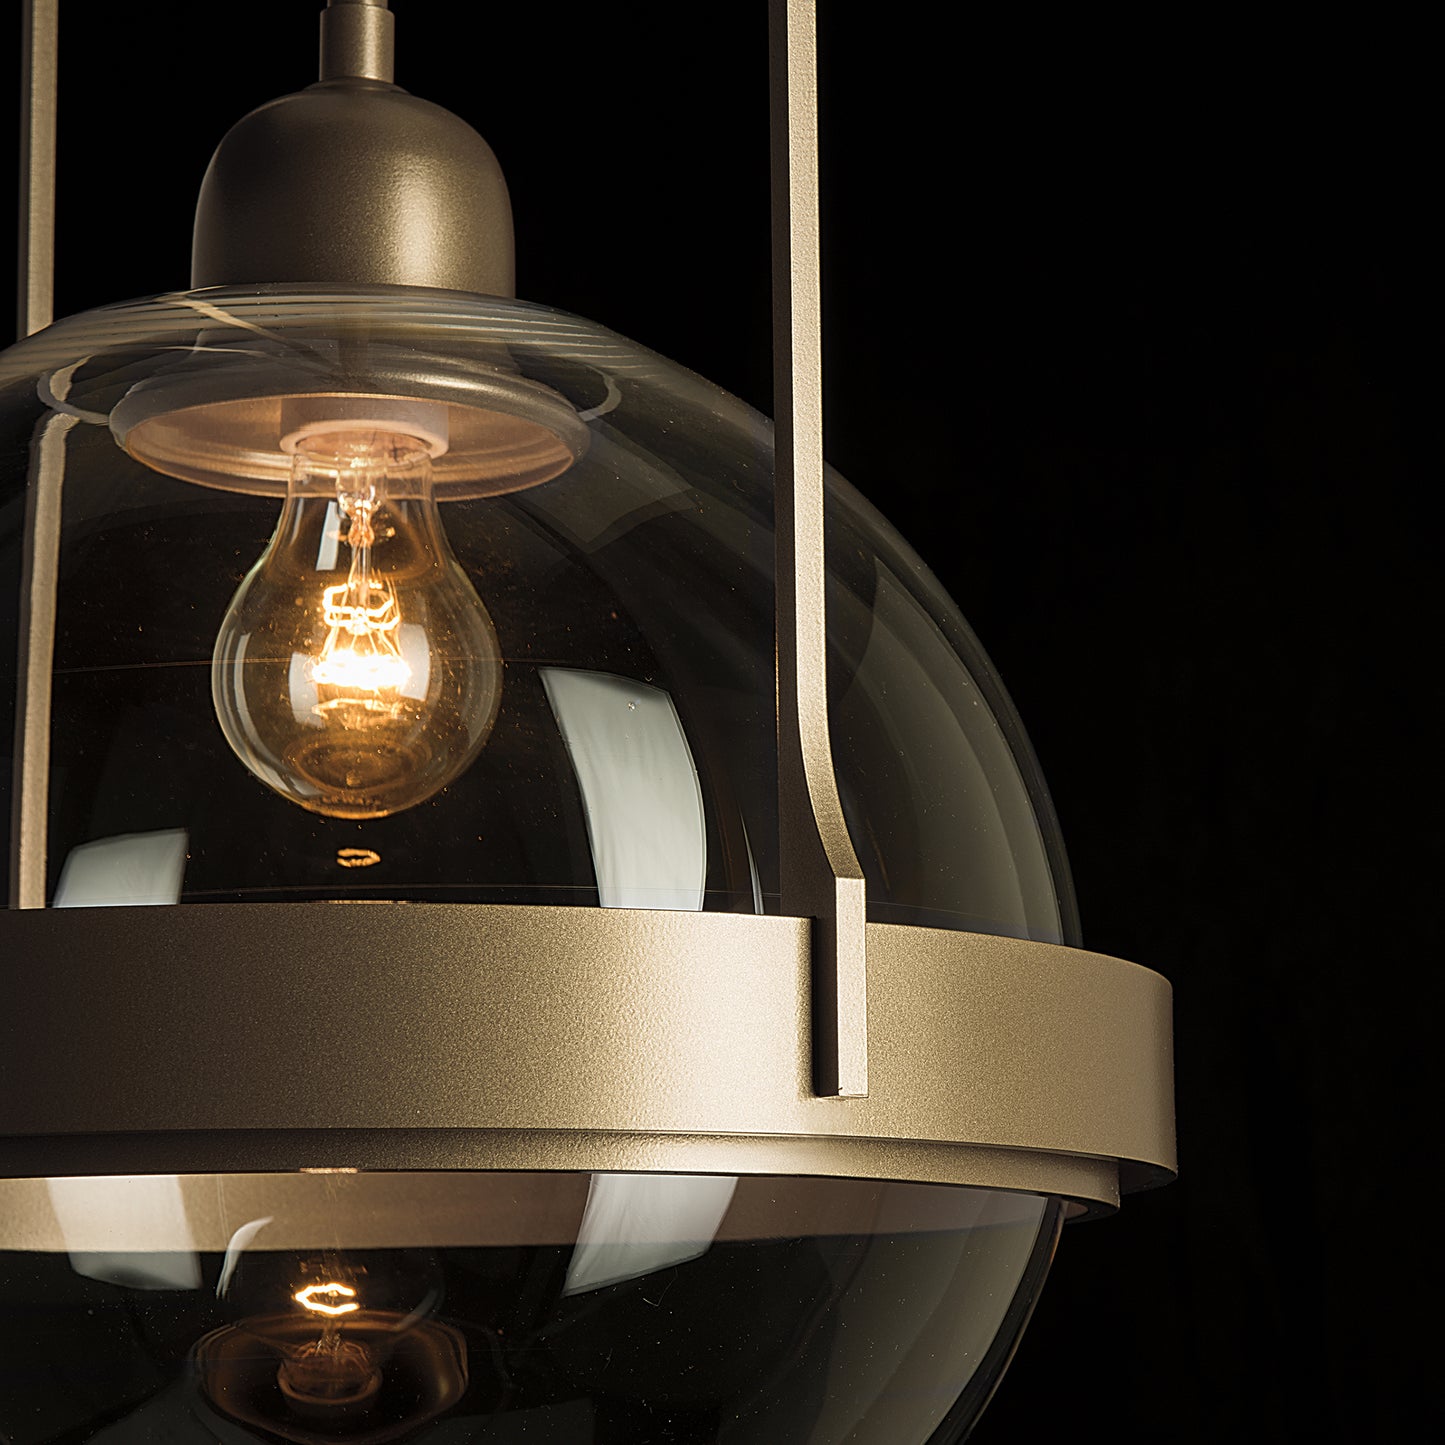 The Hubbardton Forge Atlas Mini Pendant, handcrafted in Vermont, is a stunning piece of Hubbardton Forge lighting featuring a light bulb hanging from a glass globe.